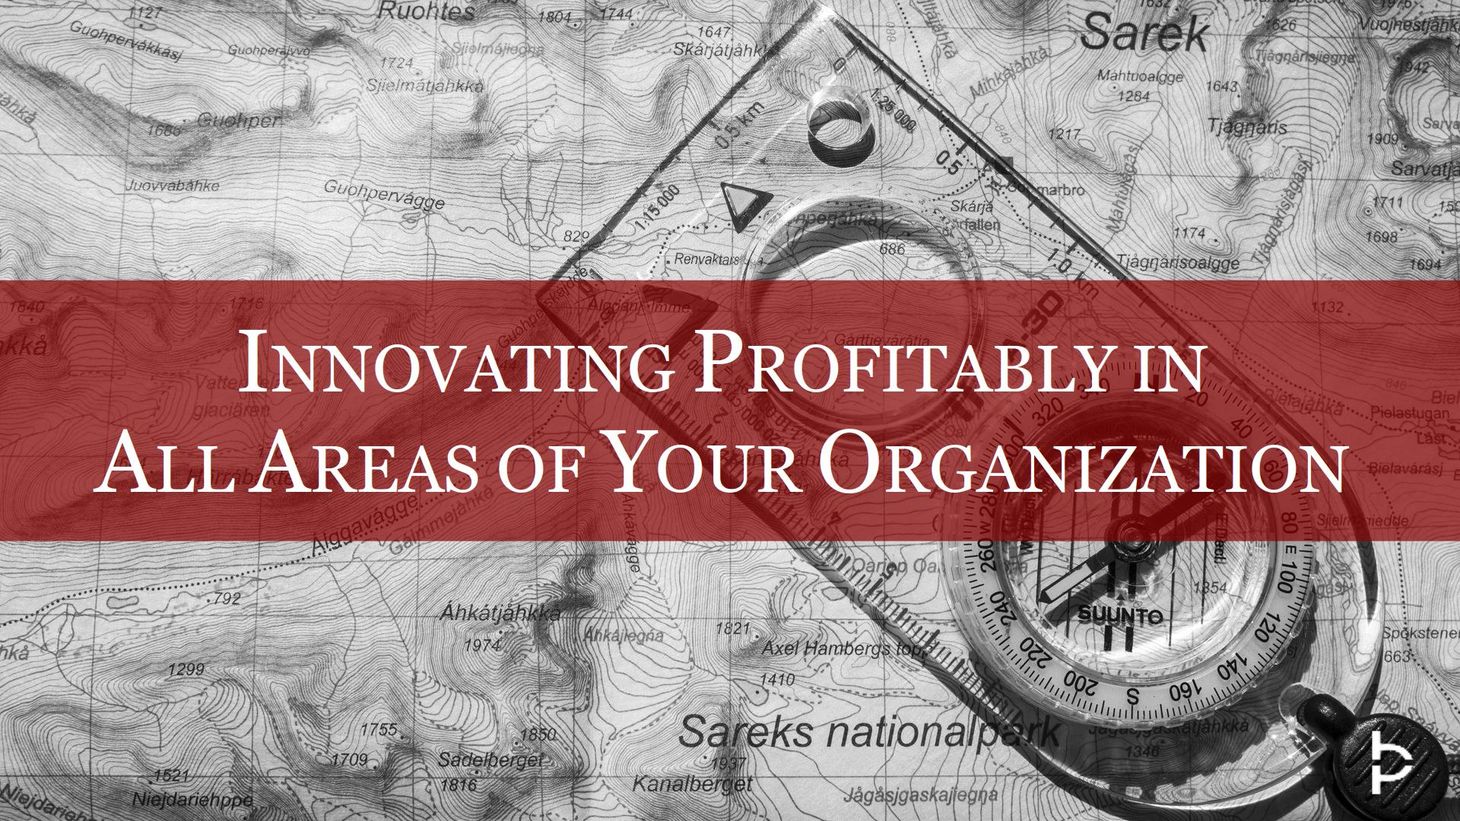 Innovating Profitably In All Areas of Your Organization